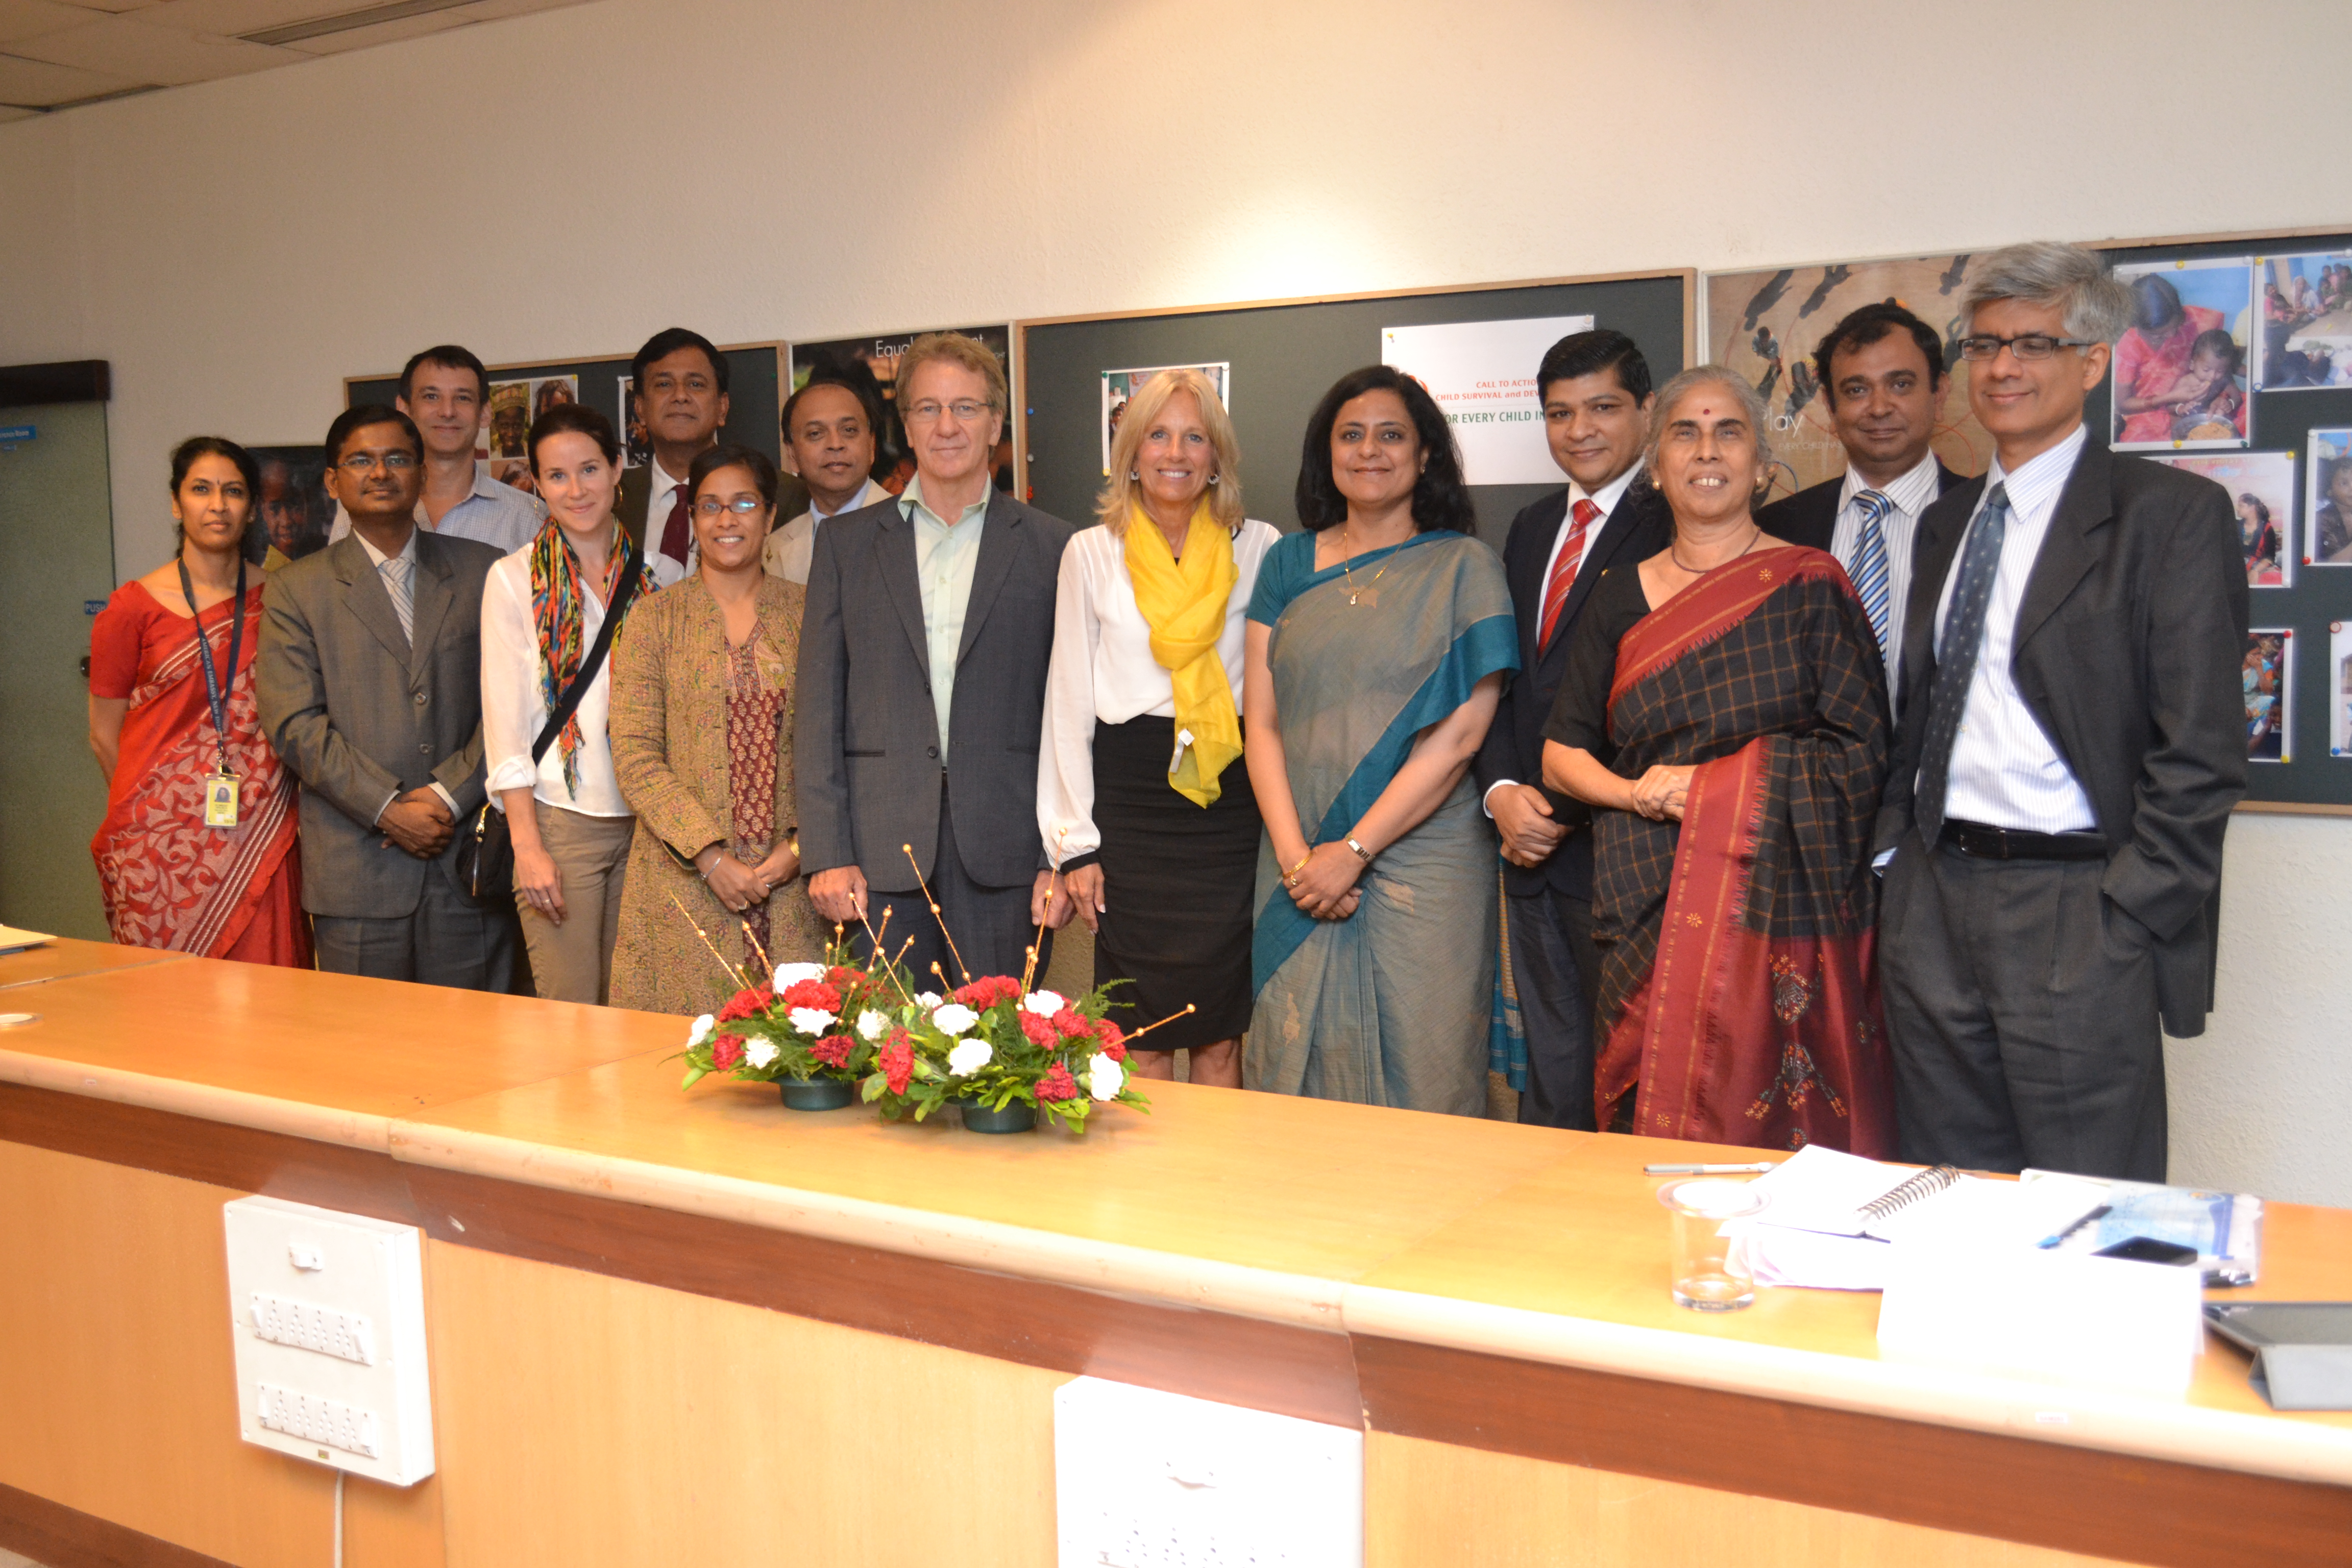 Dr. Biden meets with community leaders, US and India agency officials, and NGOS